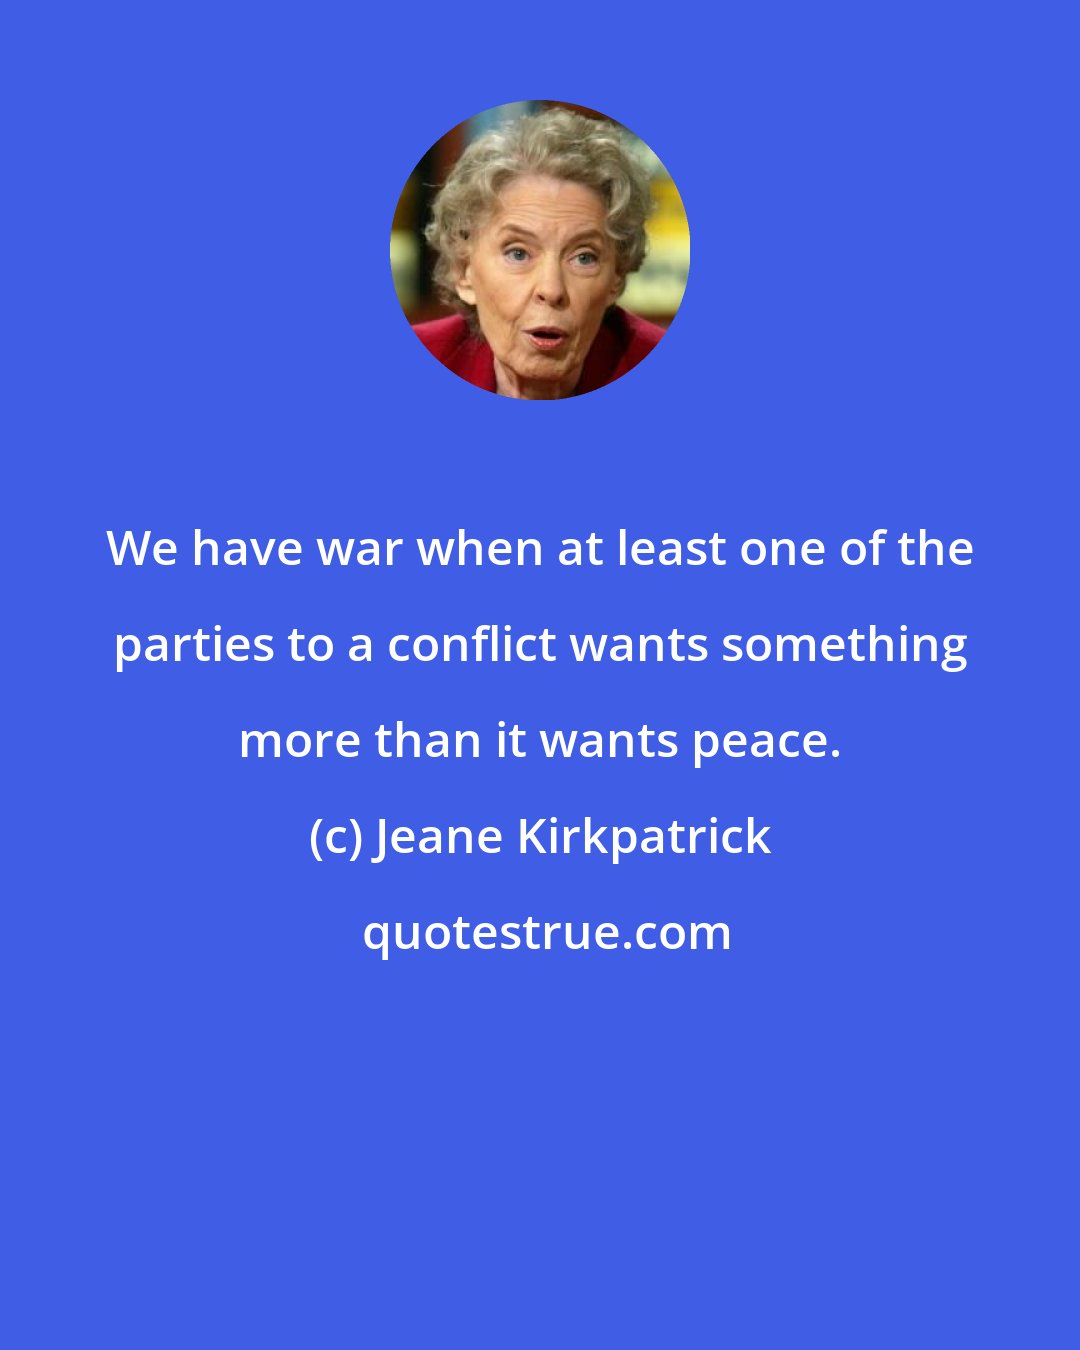 Jeane Kirkpatrick: We have war when at least one of the parties to a conflict wants something more than it wants peace.